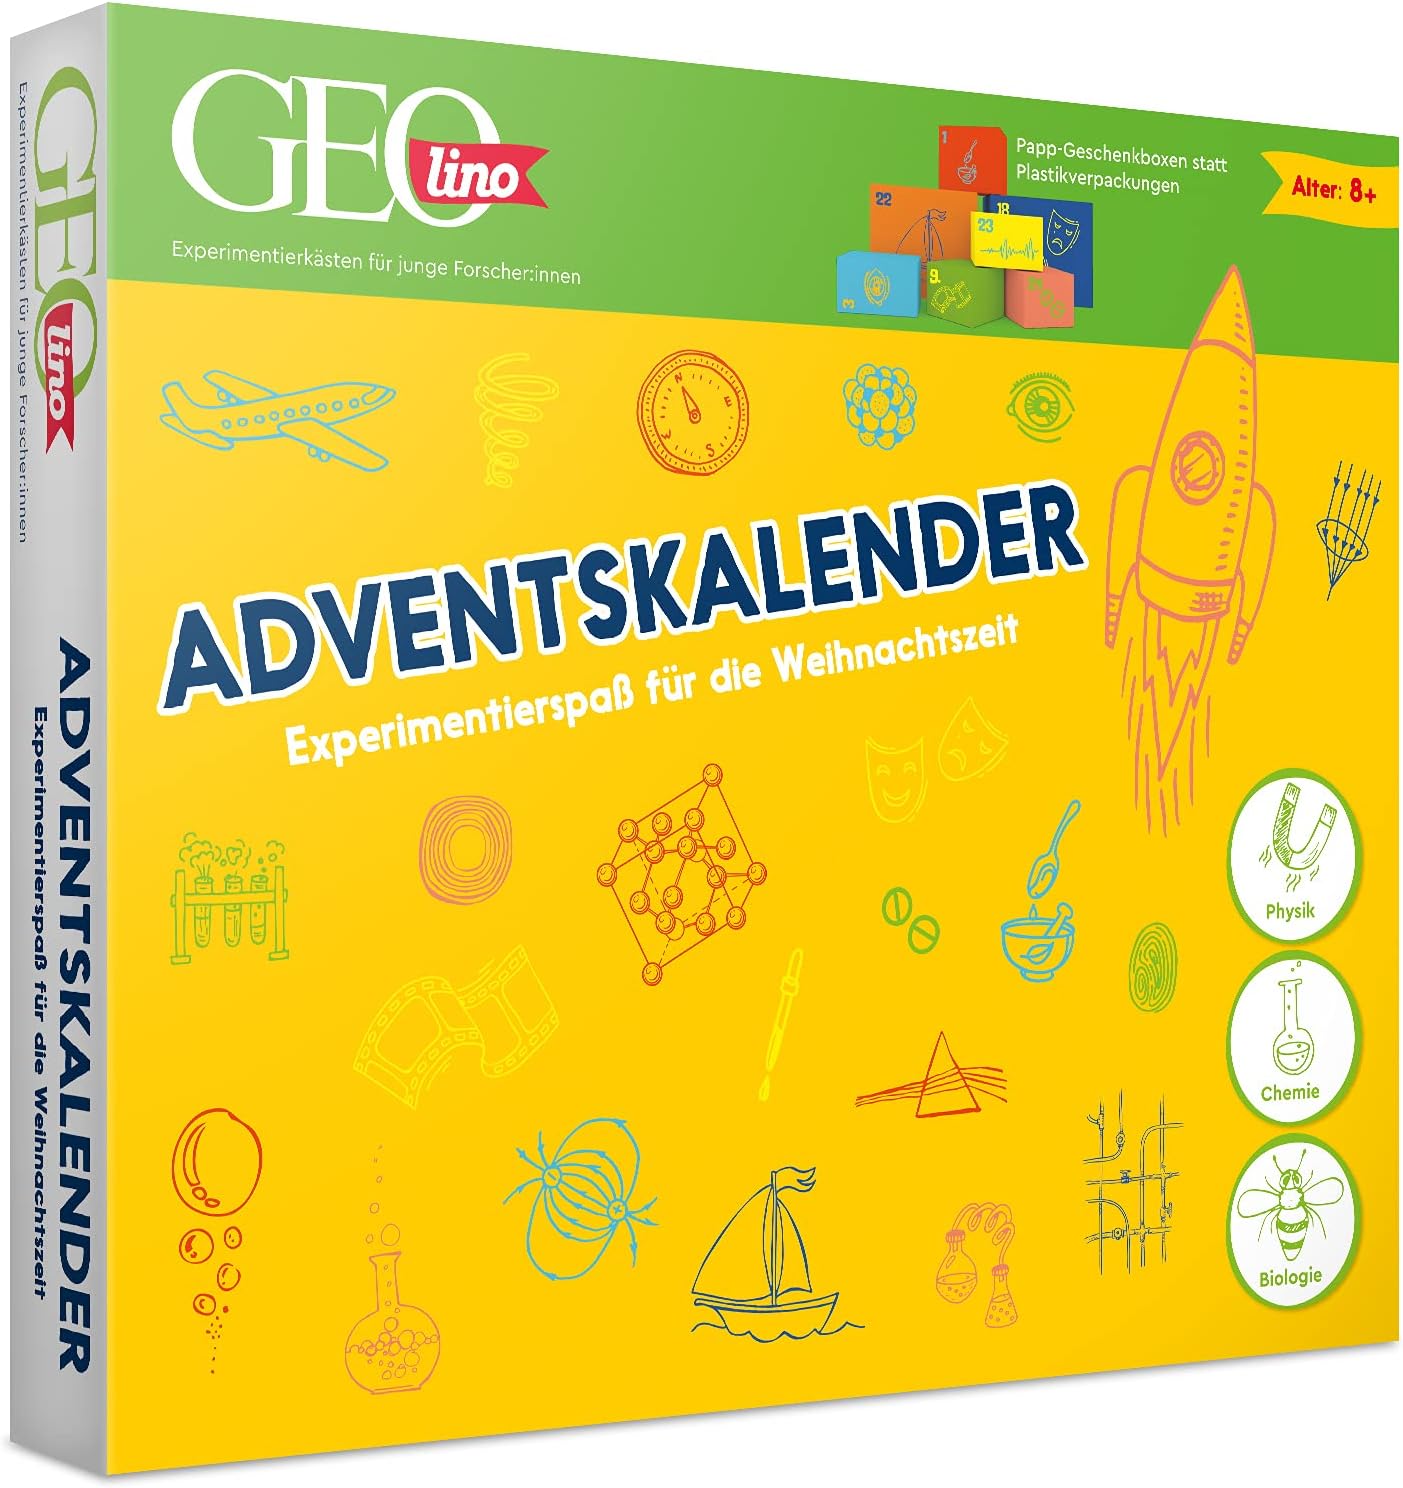 Franzis 67070 Geolino Advent Calendar Natural Sciences (Physics, Chemistry & Biology), Experiment Fun for the Christmas Season, for Children from 8 Years